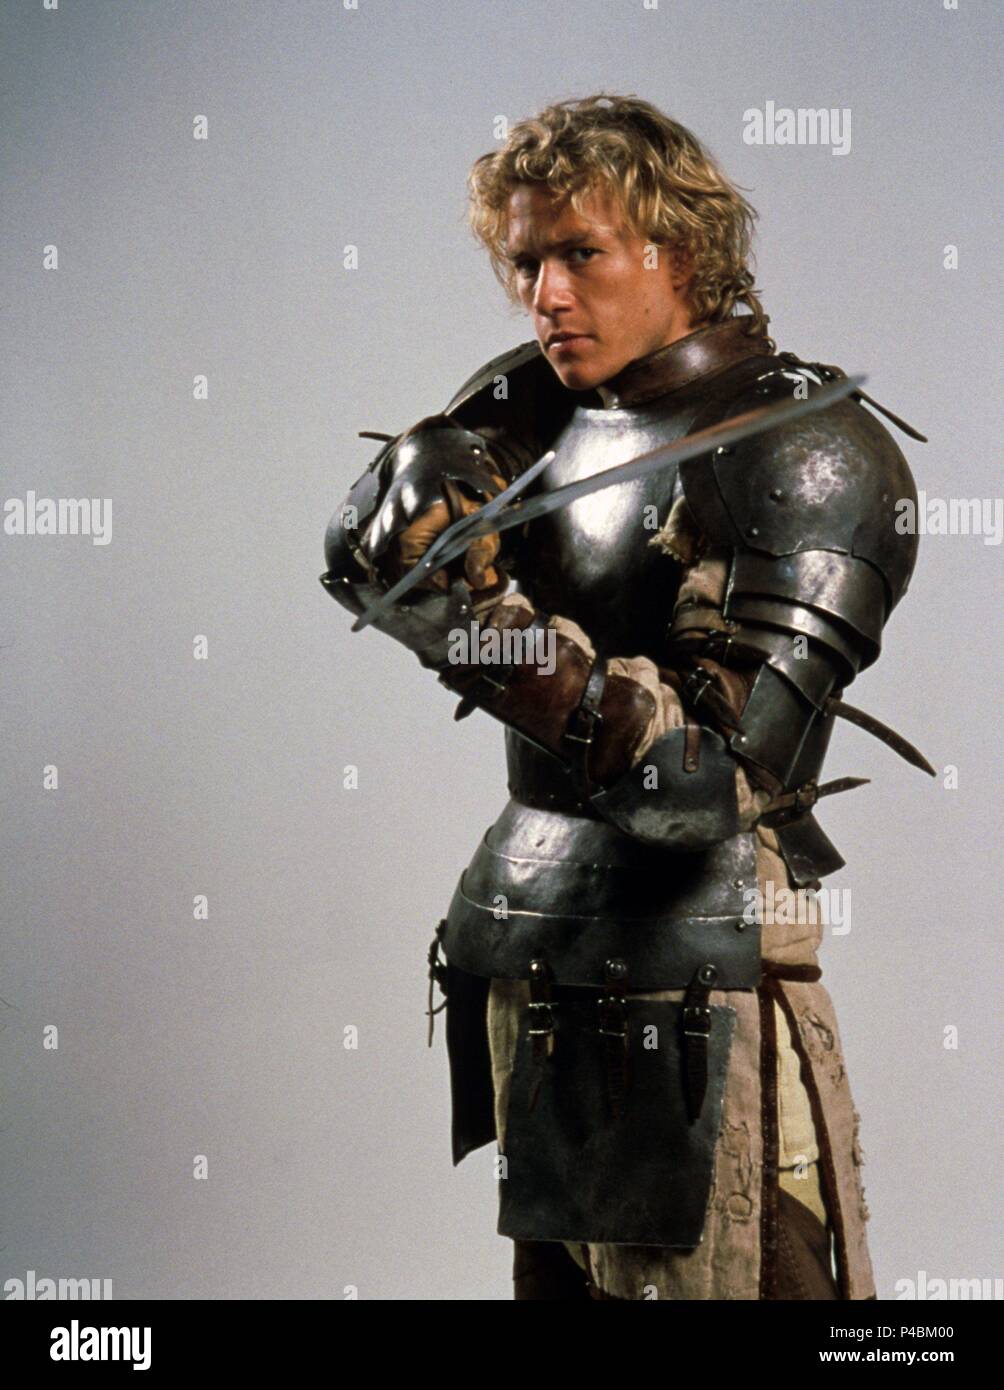 Original Film Title: A KNIGHT'S TALE.  English Title: A KNIGHT'S TALE.  Film Director: BRIAN HELGELAND.  Year: 2001.  Stars: HEATH LEDGER. Credit: COLUMBIA PICTURES / Album Stock Photo